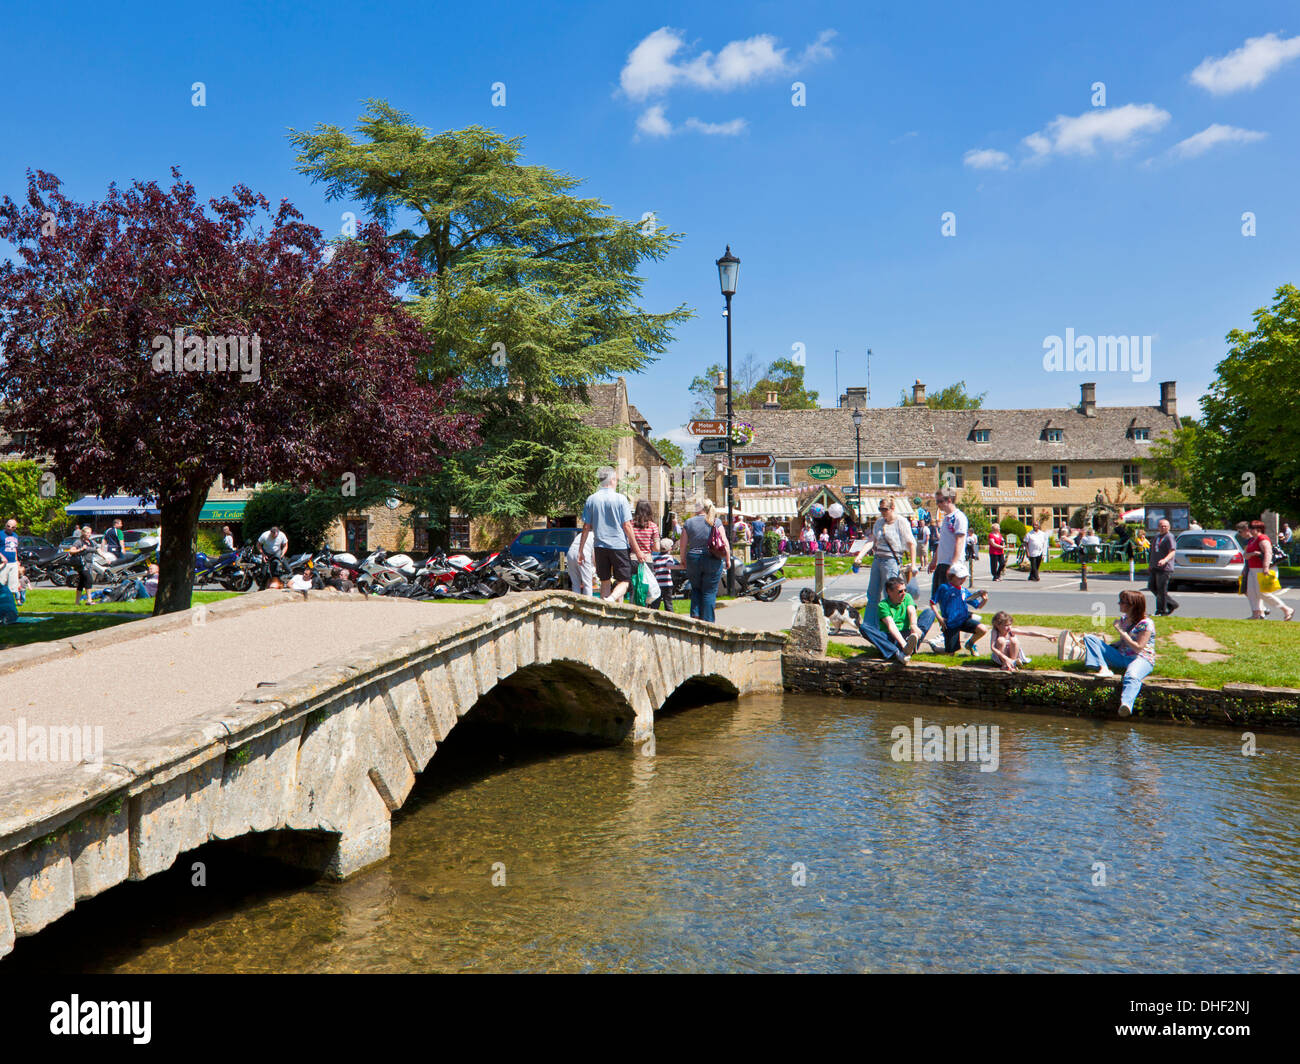 Bridge over the River Windrush in Bourton on the Water Cotswolds Gloucestershire England UK GB Europe Stock Photo